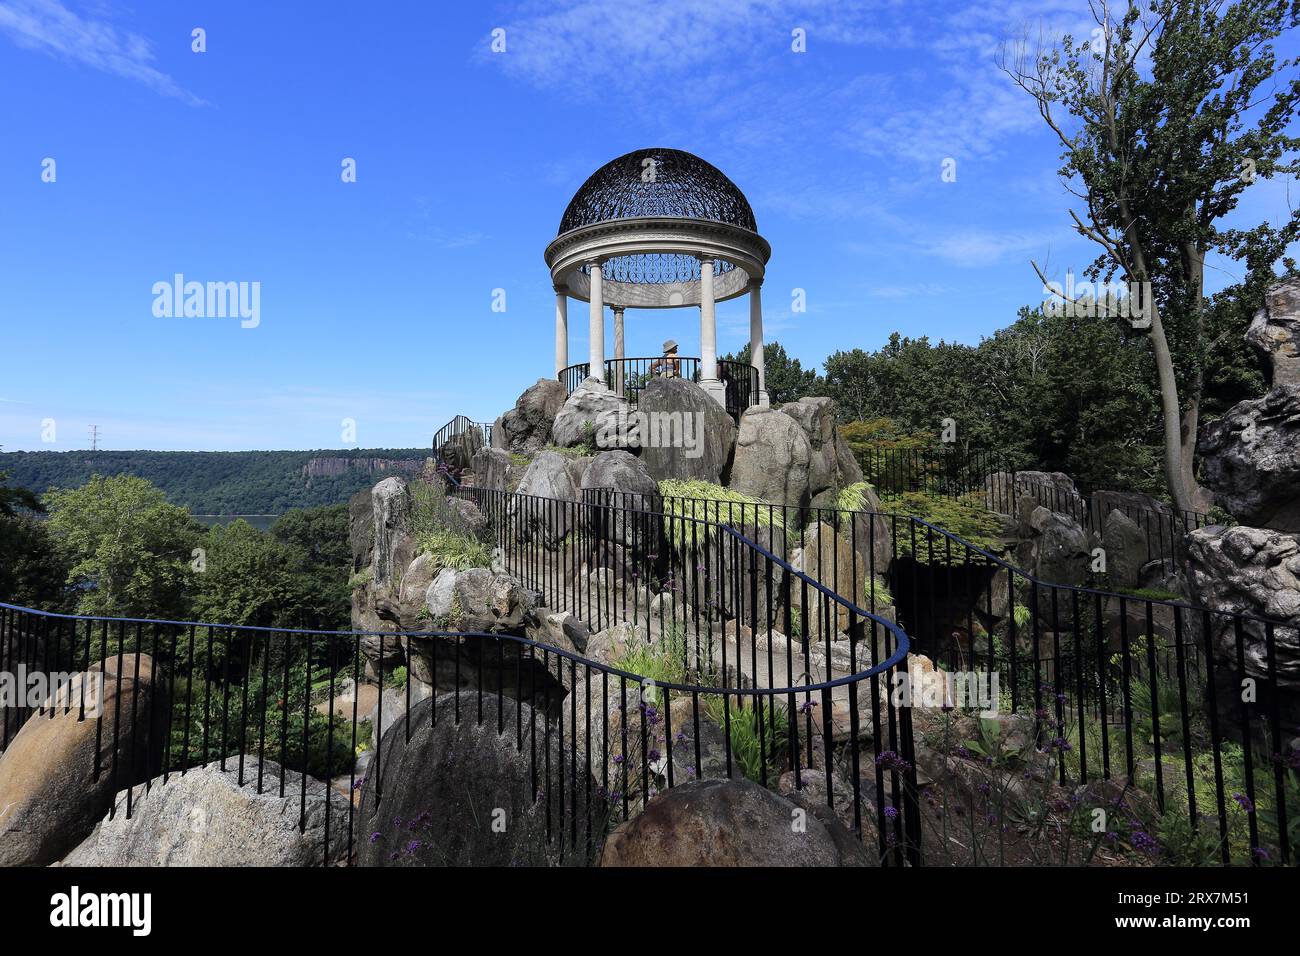 Il Temple of Love Untermyer Park Yonkers NY Foto Stock